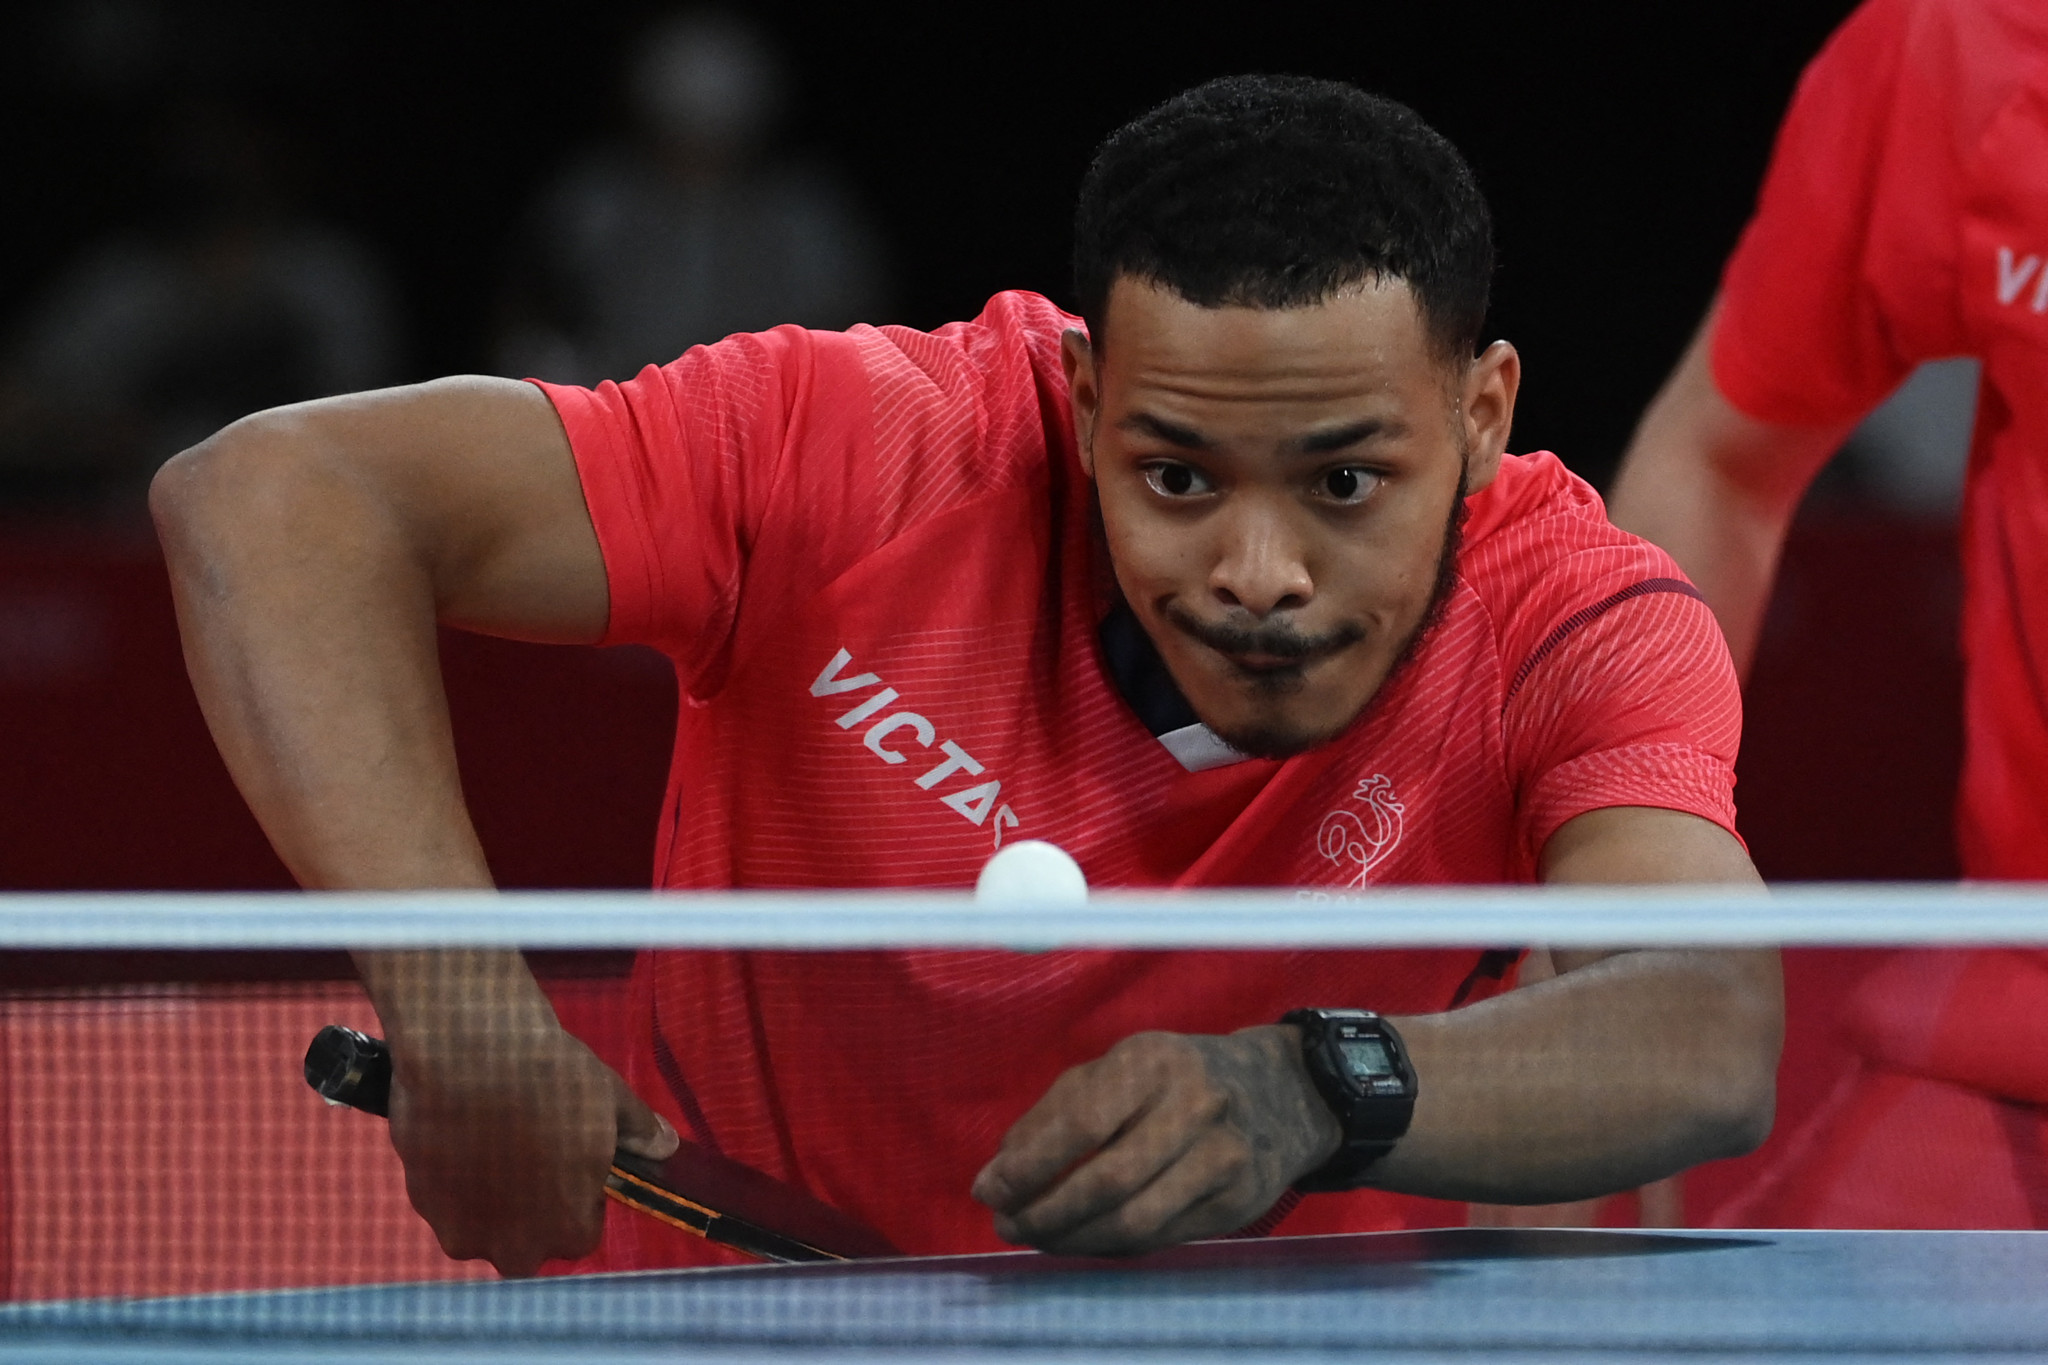 Cassin triumphs against Persson at WTT Star Contender in Doha